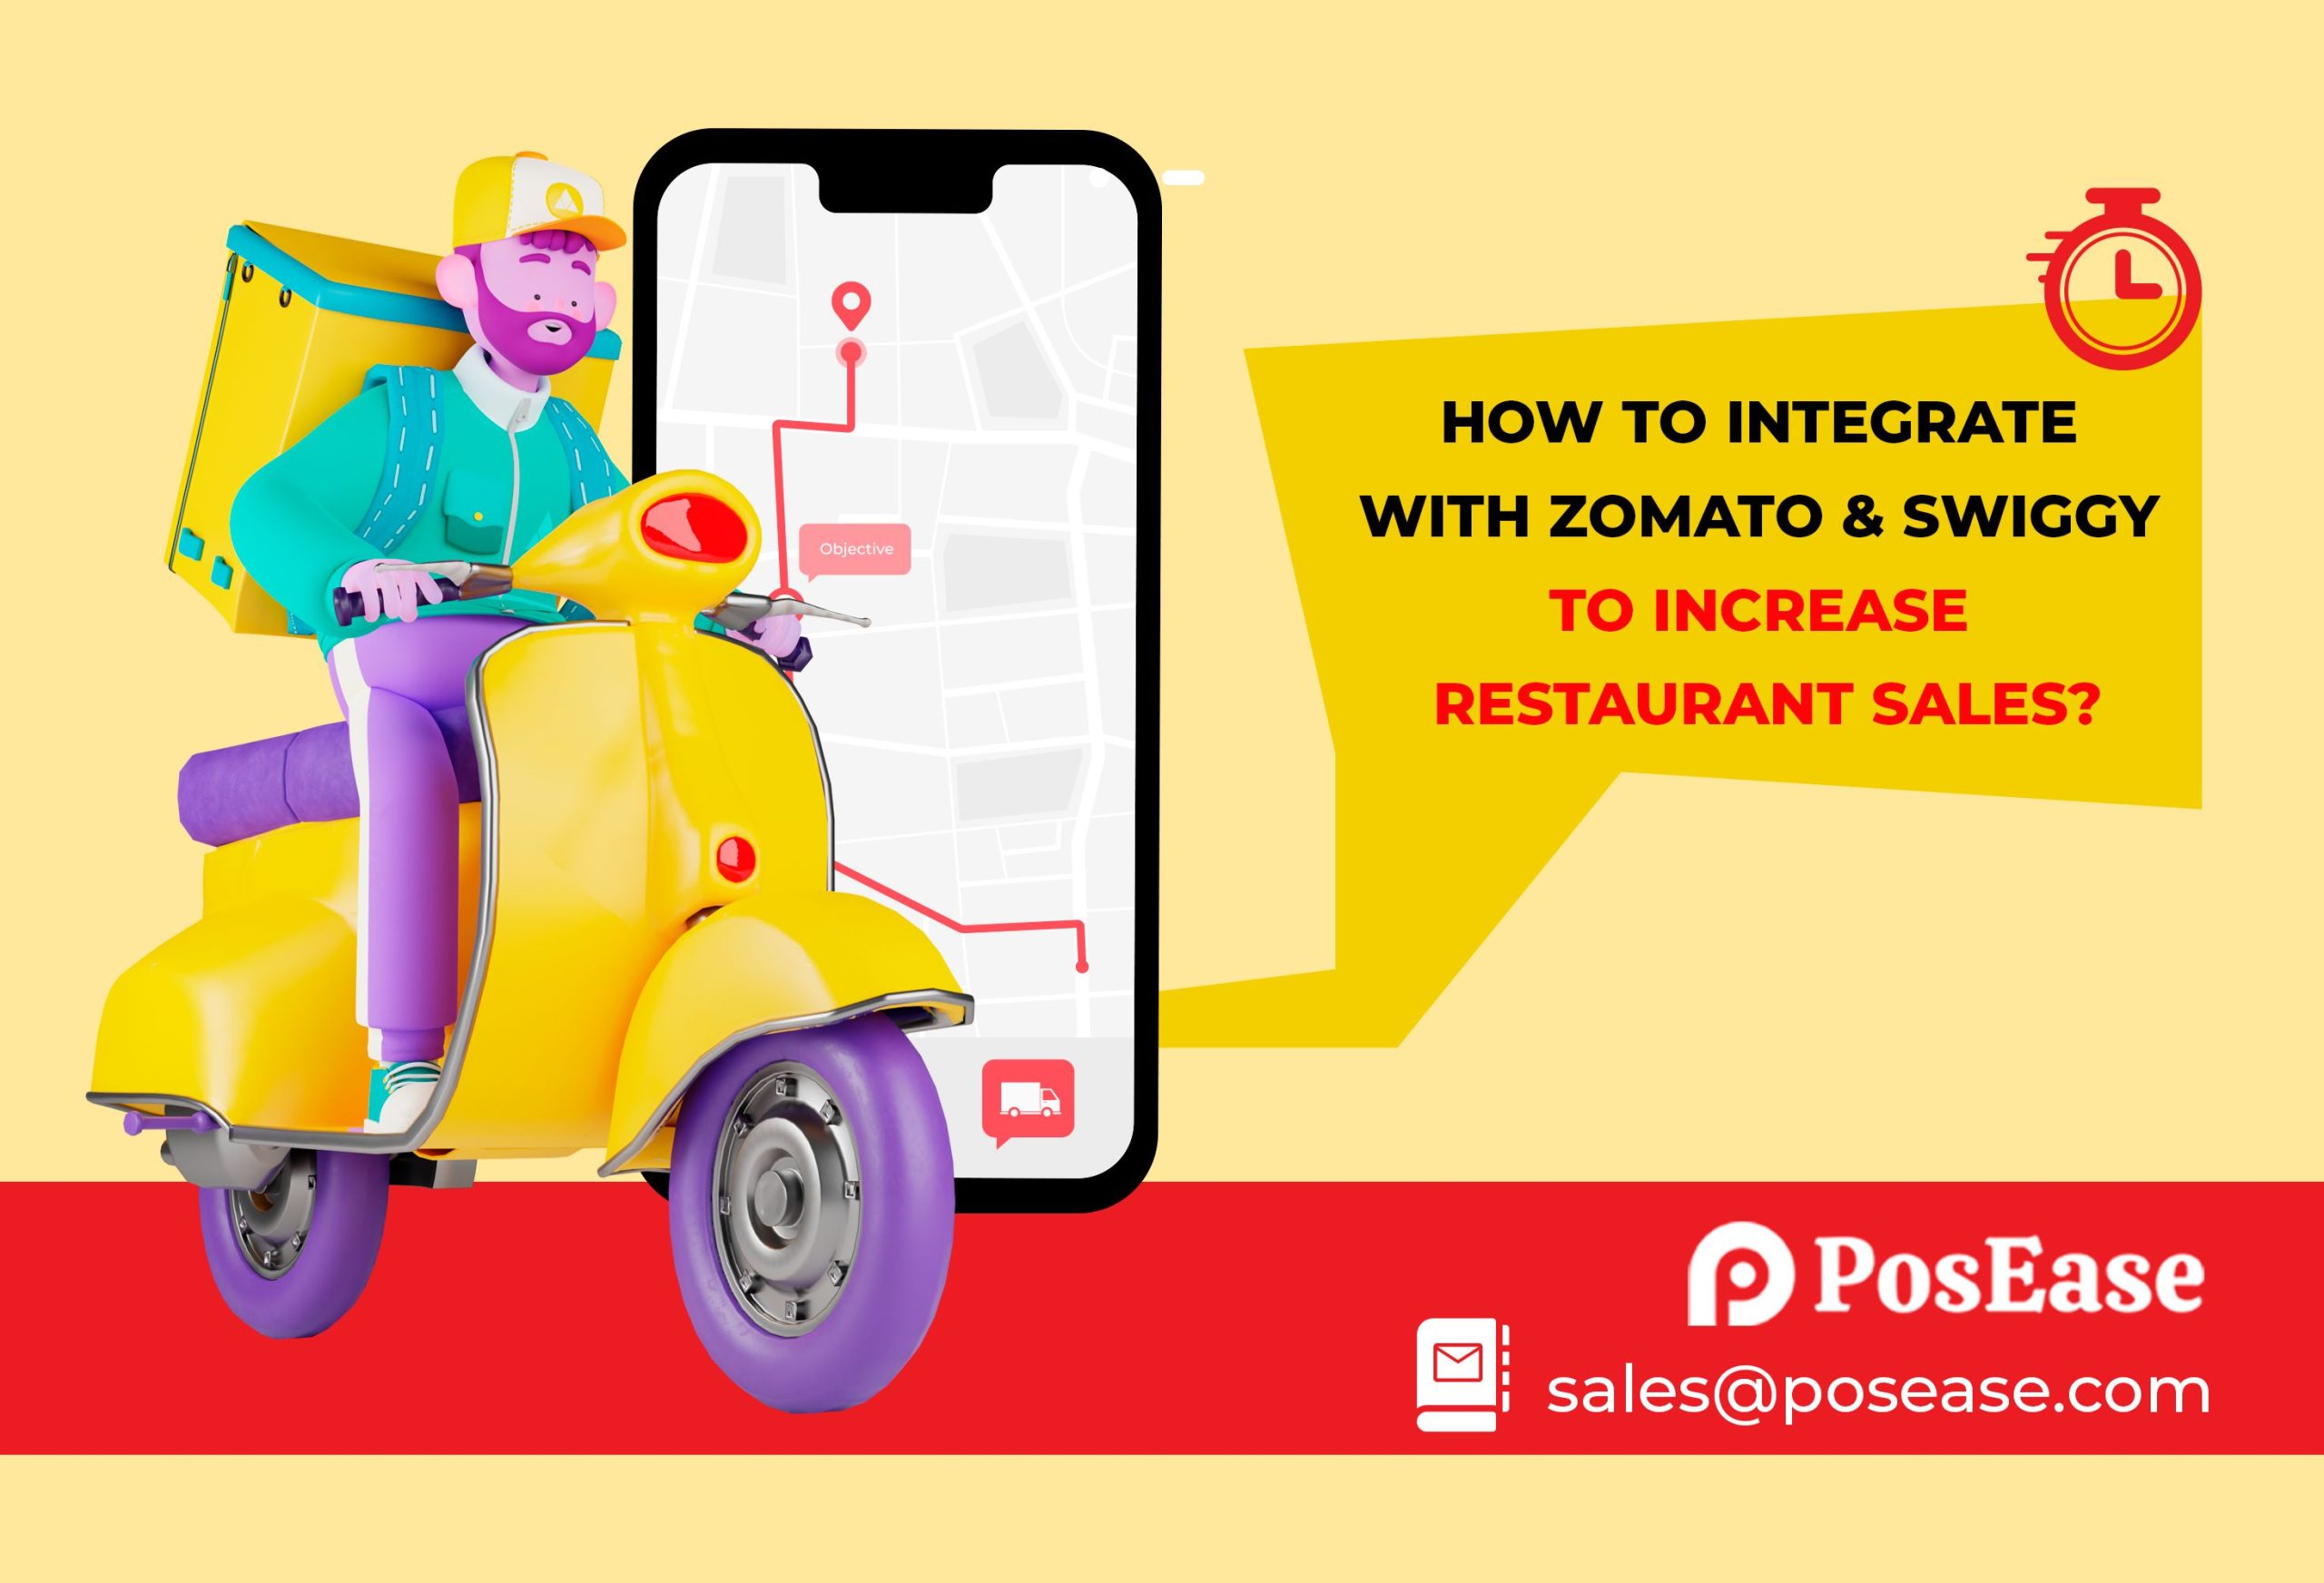 How to integrate with Zomato and Swiggy to increase restaurant sales?